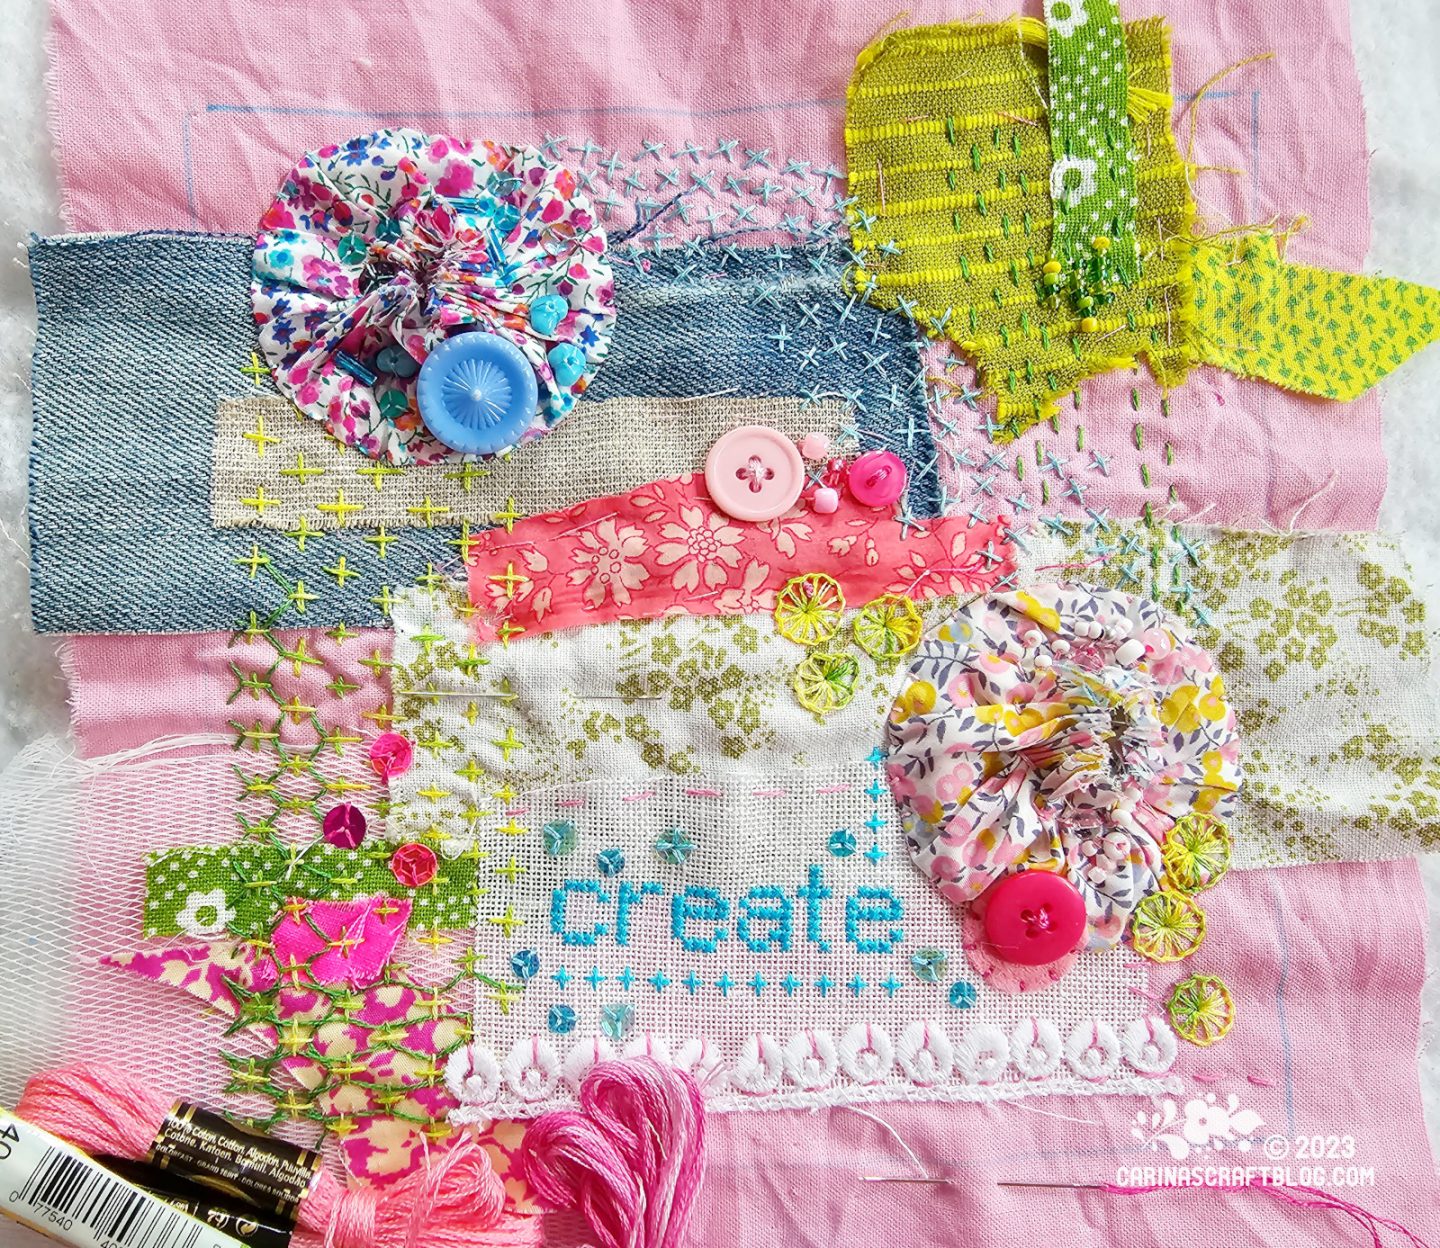 Close overhead view of a slow stitching piece with many different scraps of fabric, buttons, and embroidery on a pink fabric background.